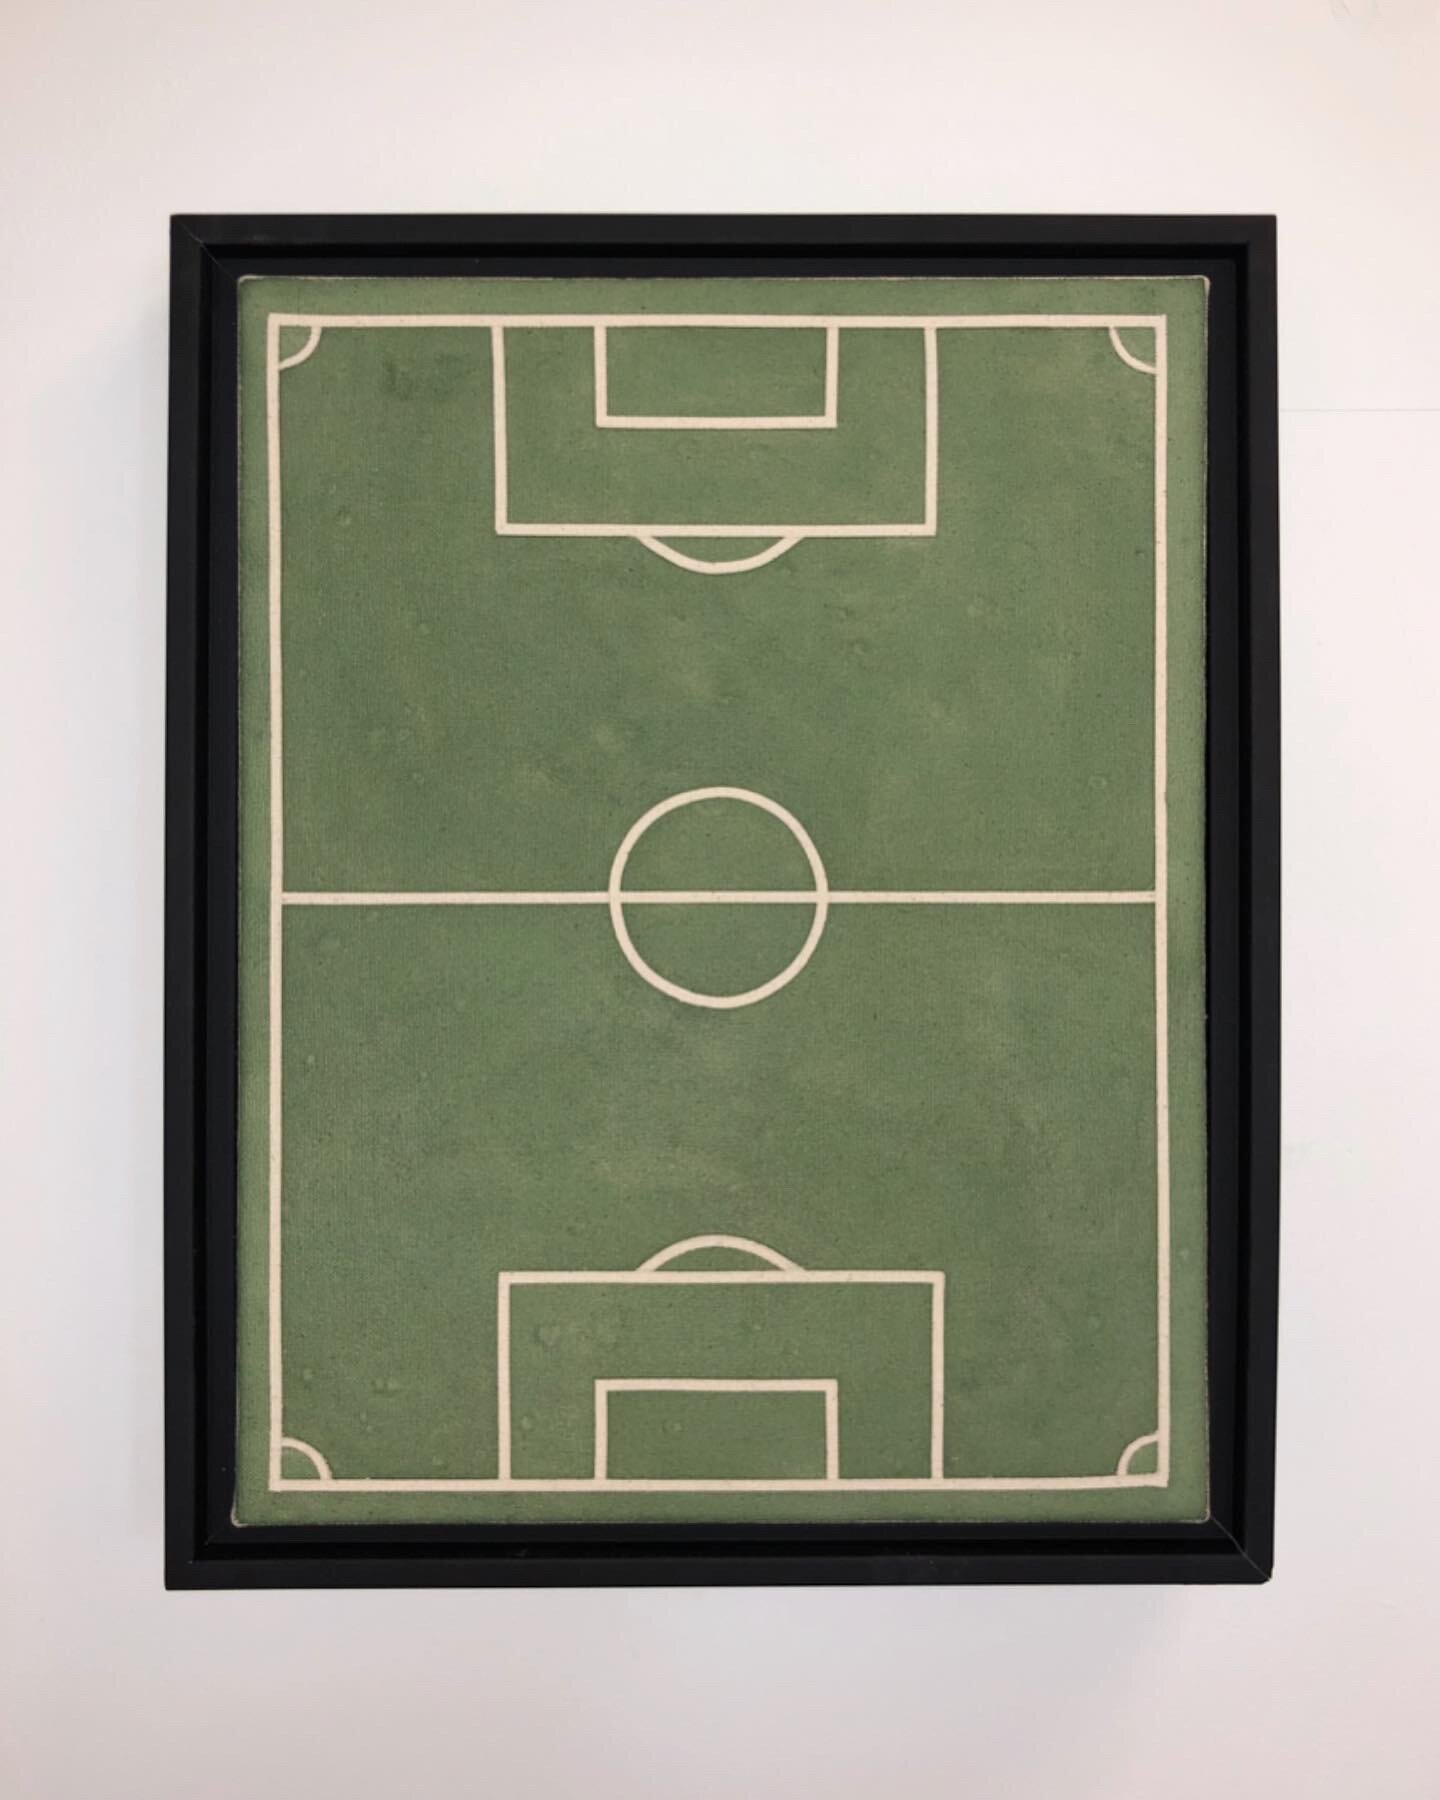   The Beautiful Game (for Dad) (and Raoul de Keyser) , 2020 Acrylic stain on canvas 11 x 14 inches (28cm x 35cm) 